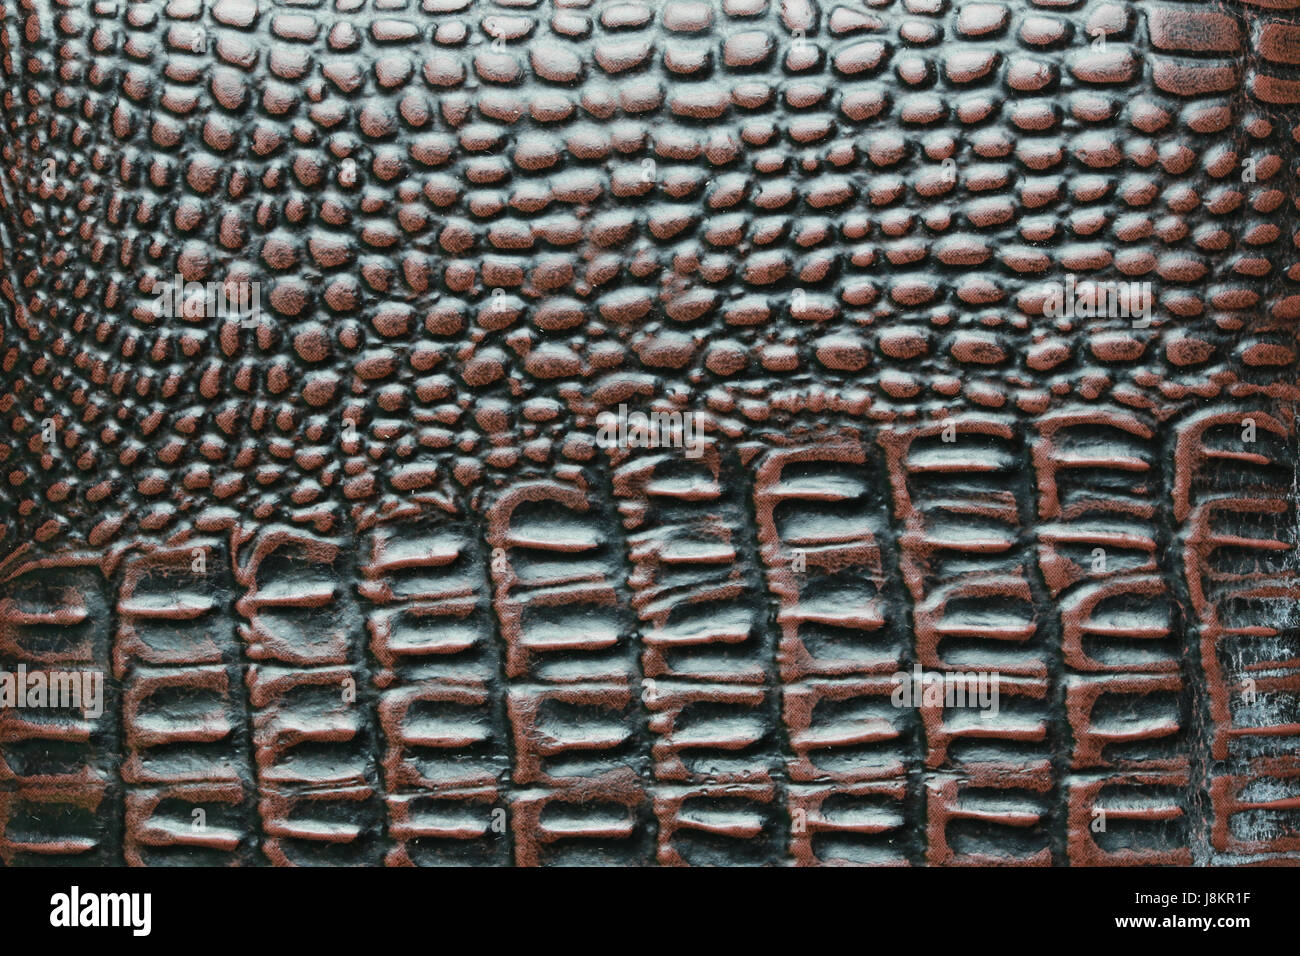 Crocodile leather bag hi-res stock photography and images - Alamy